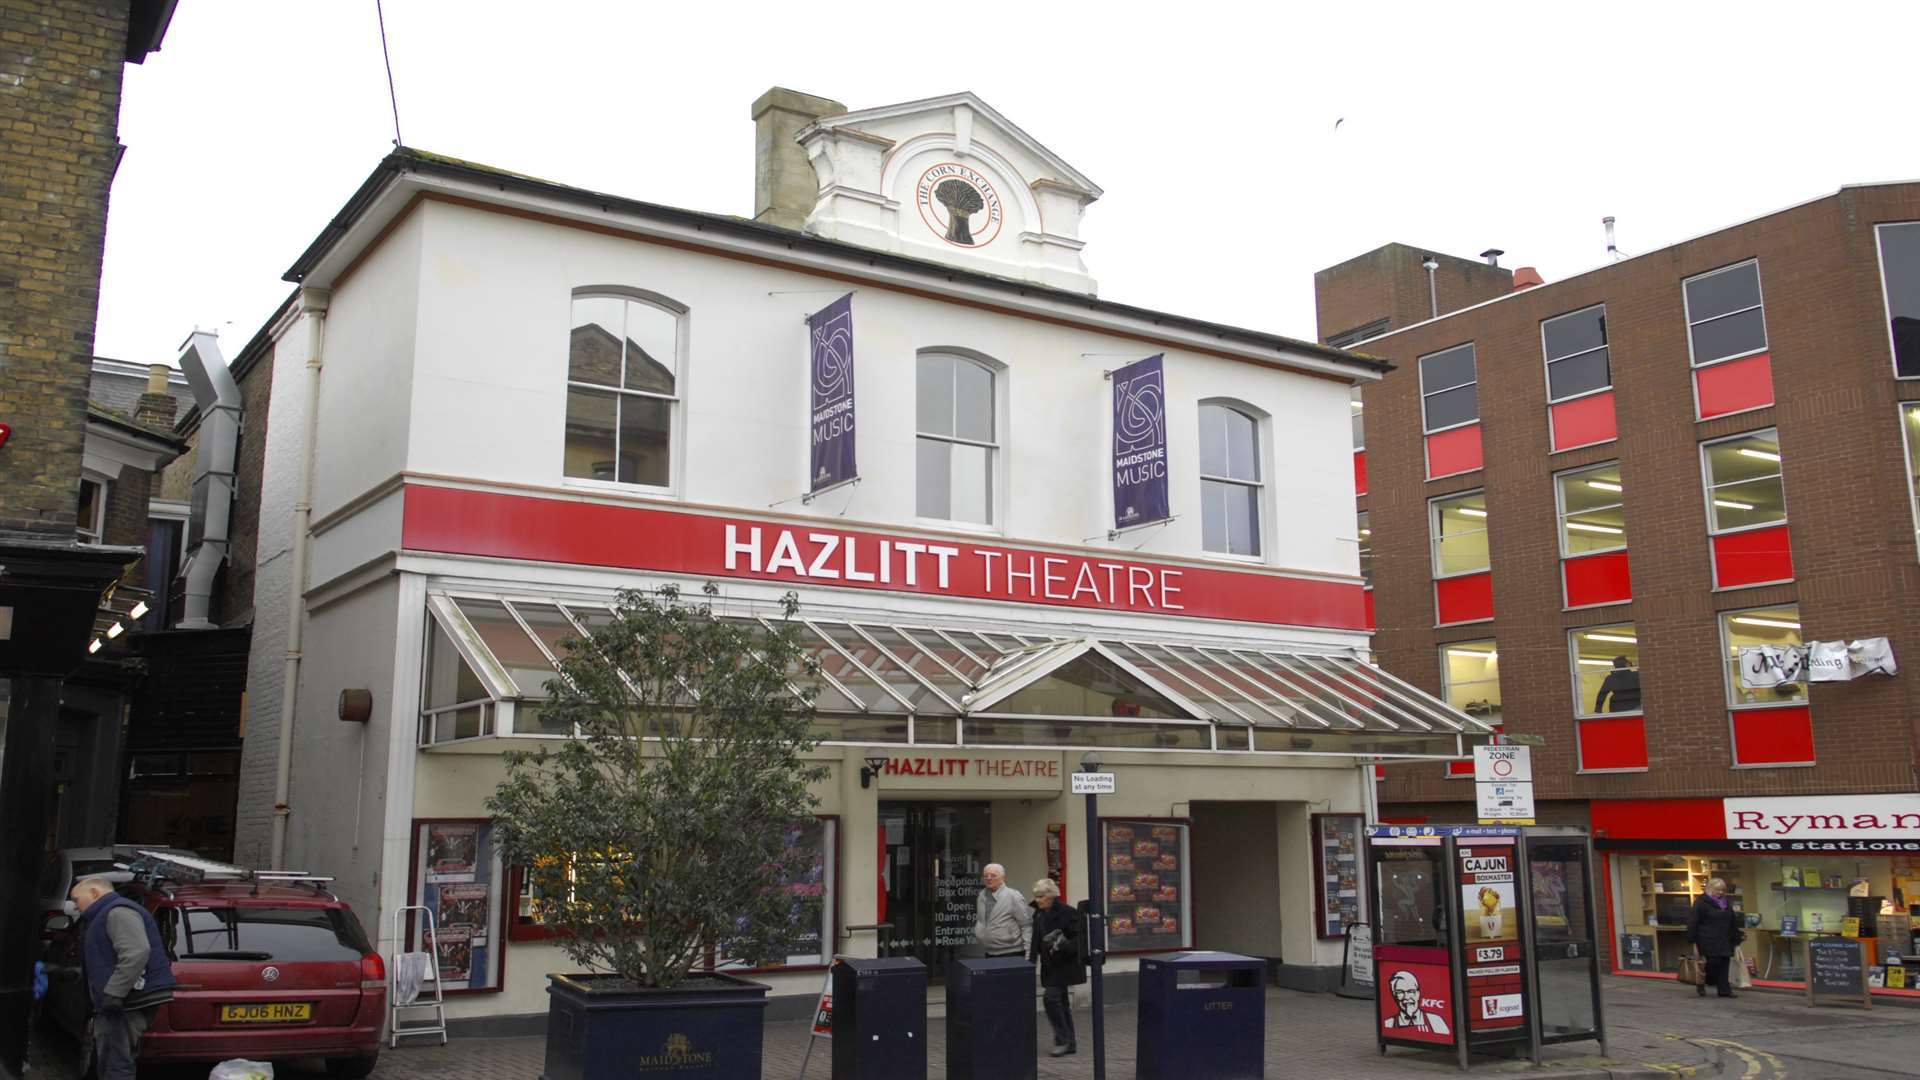 The auditions will be held at The Hazlitt Theatre in Maidstone. Picture: Martin Apps